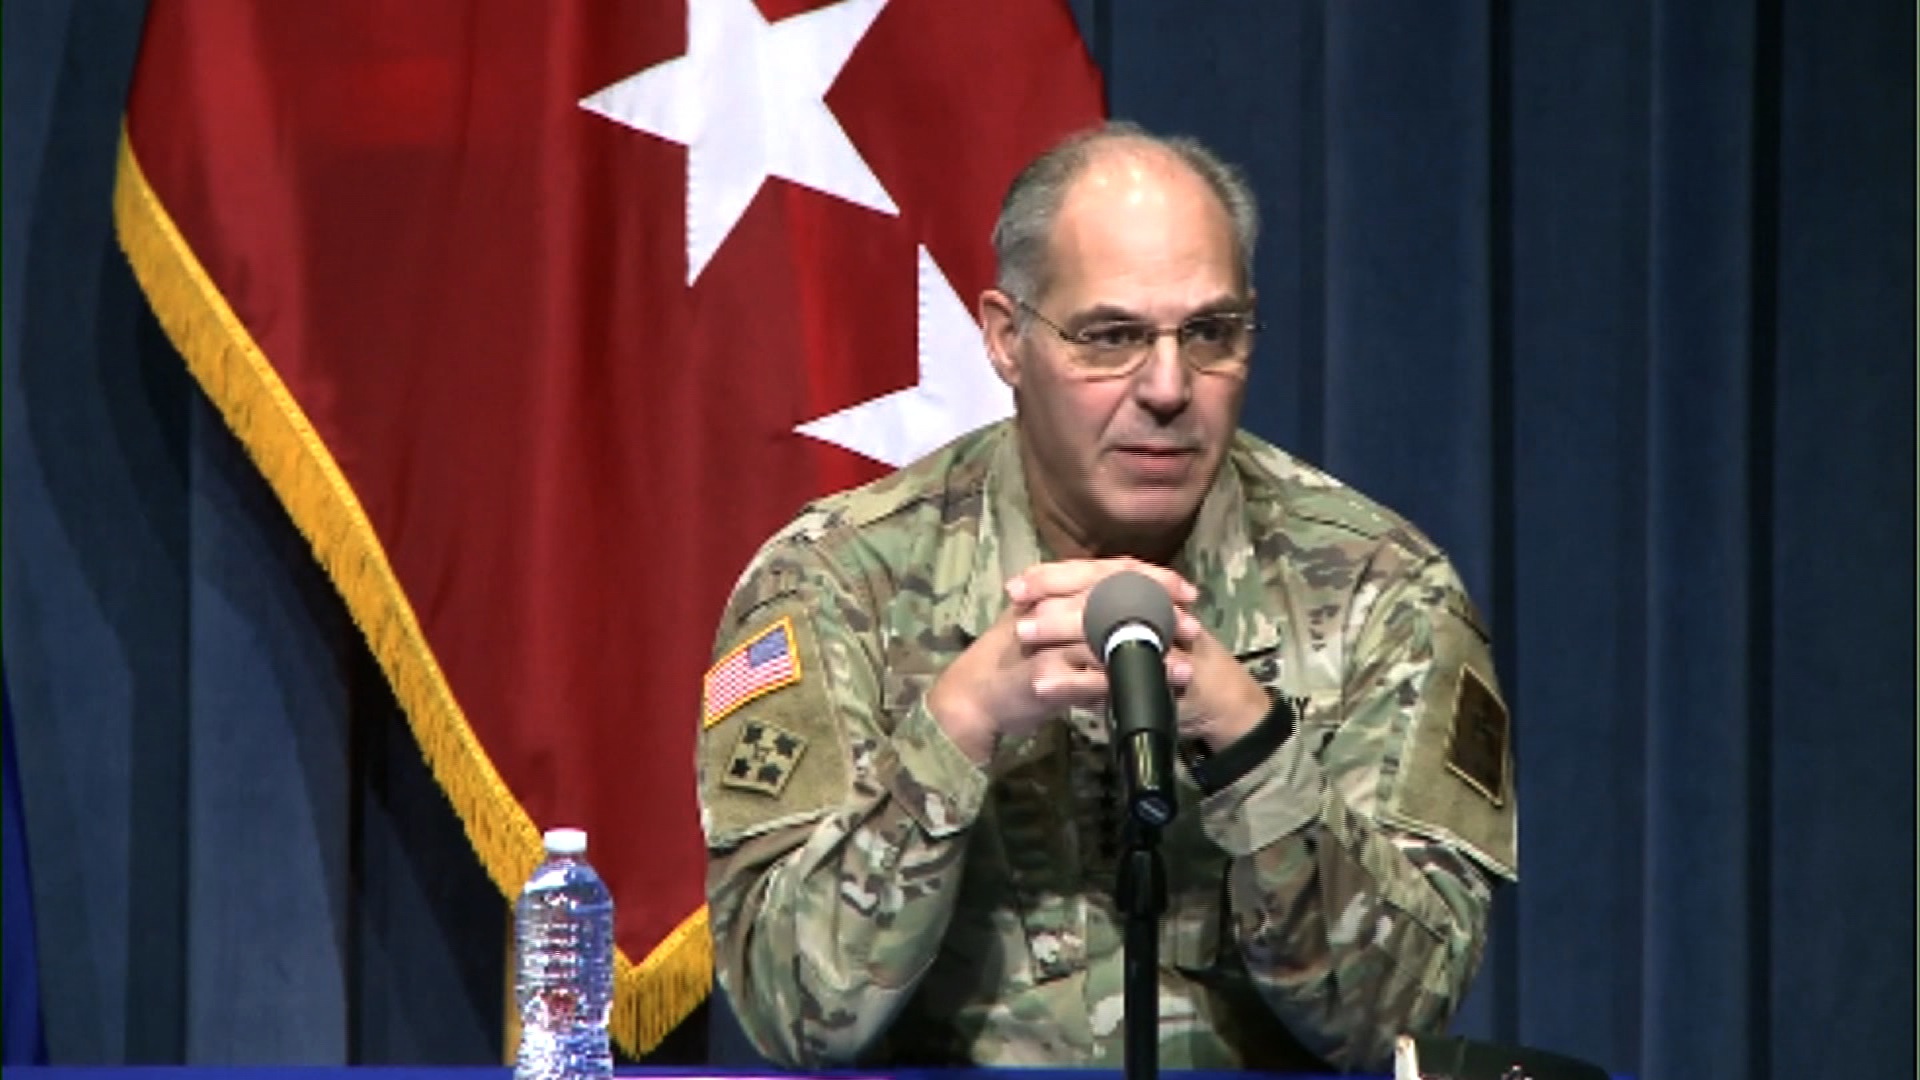 Gen. Gustave Perna, chief operating officer of Operation Warp Speed, speaks during a press conference on December 14.